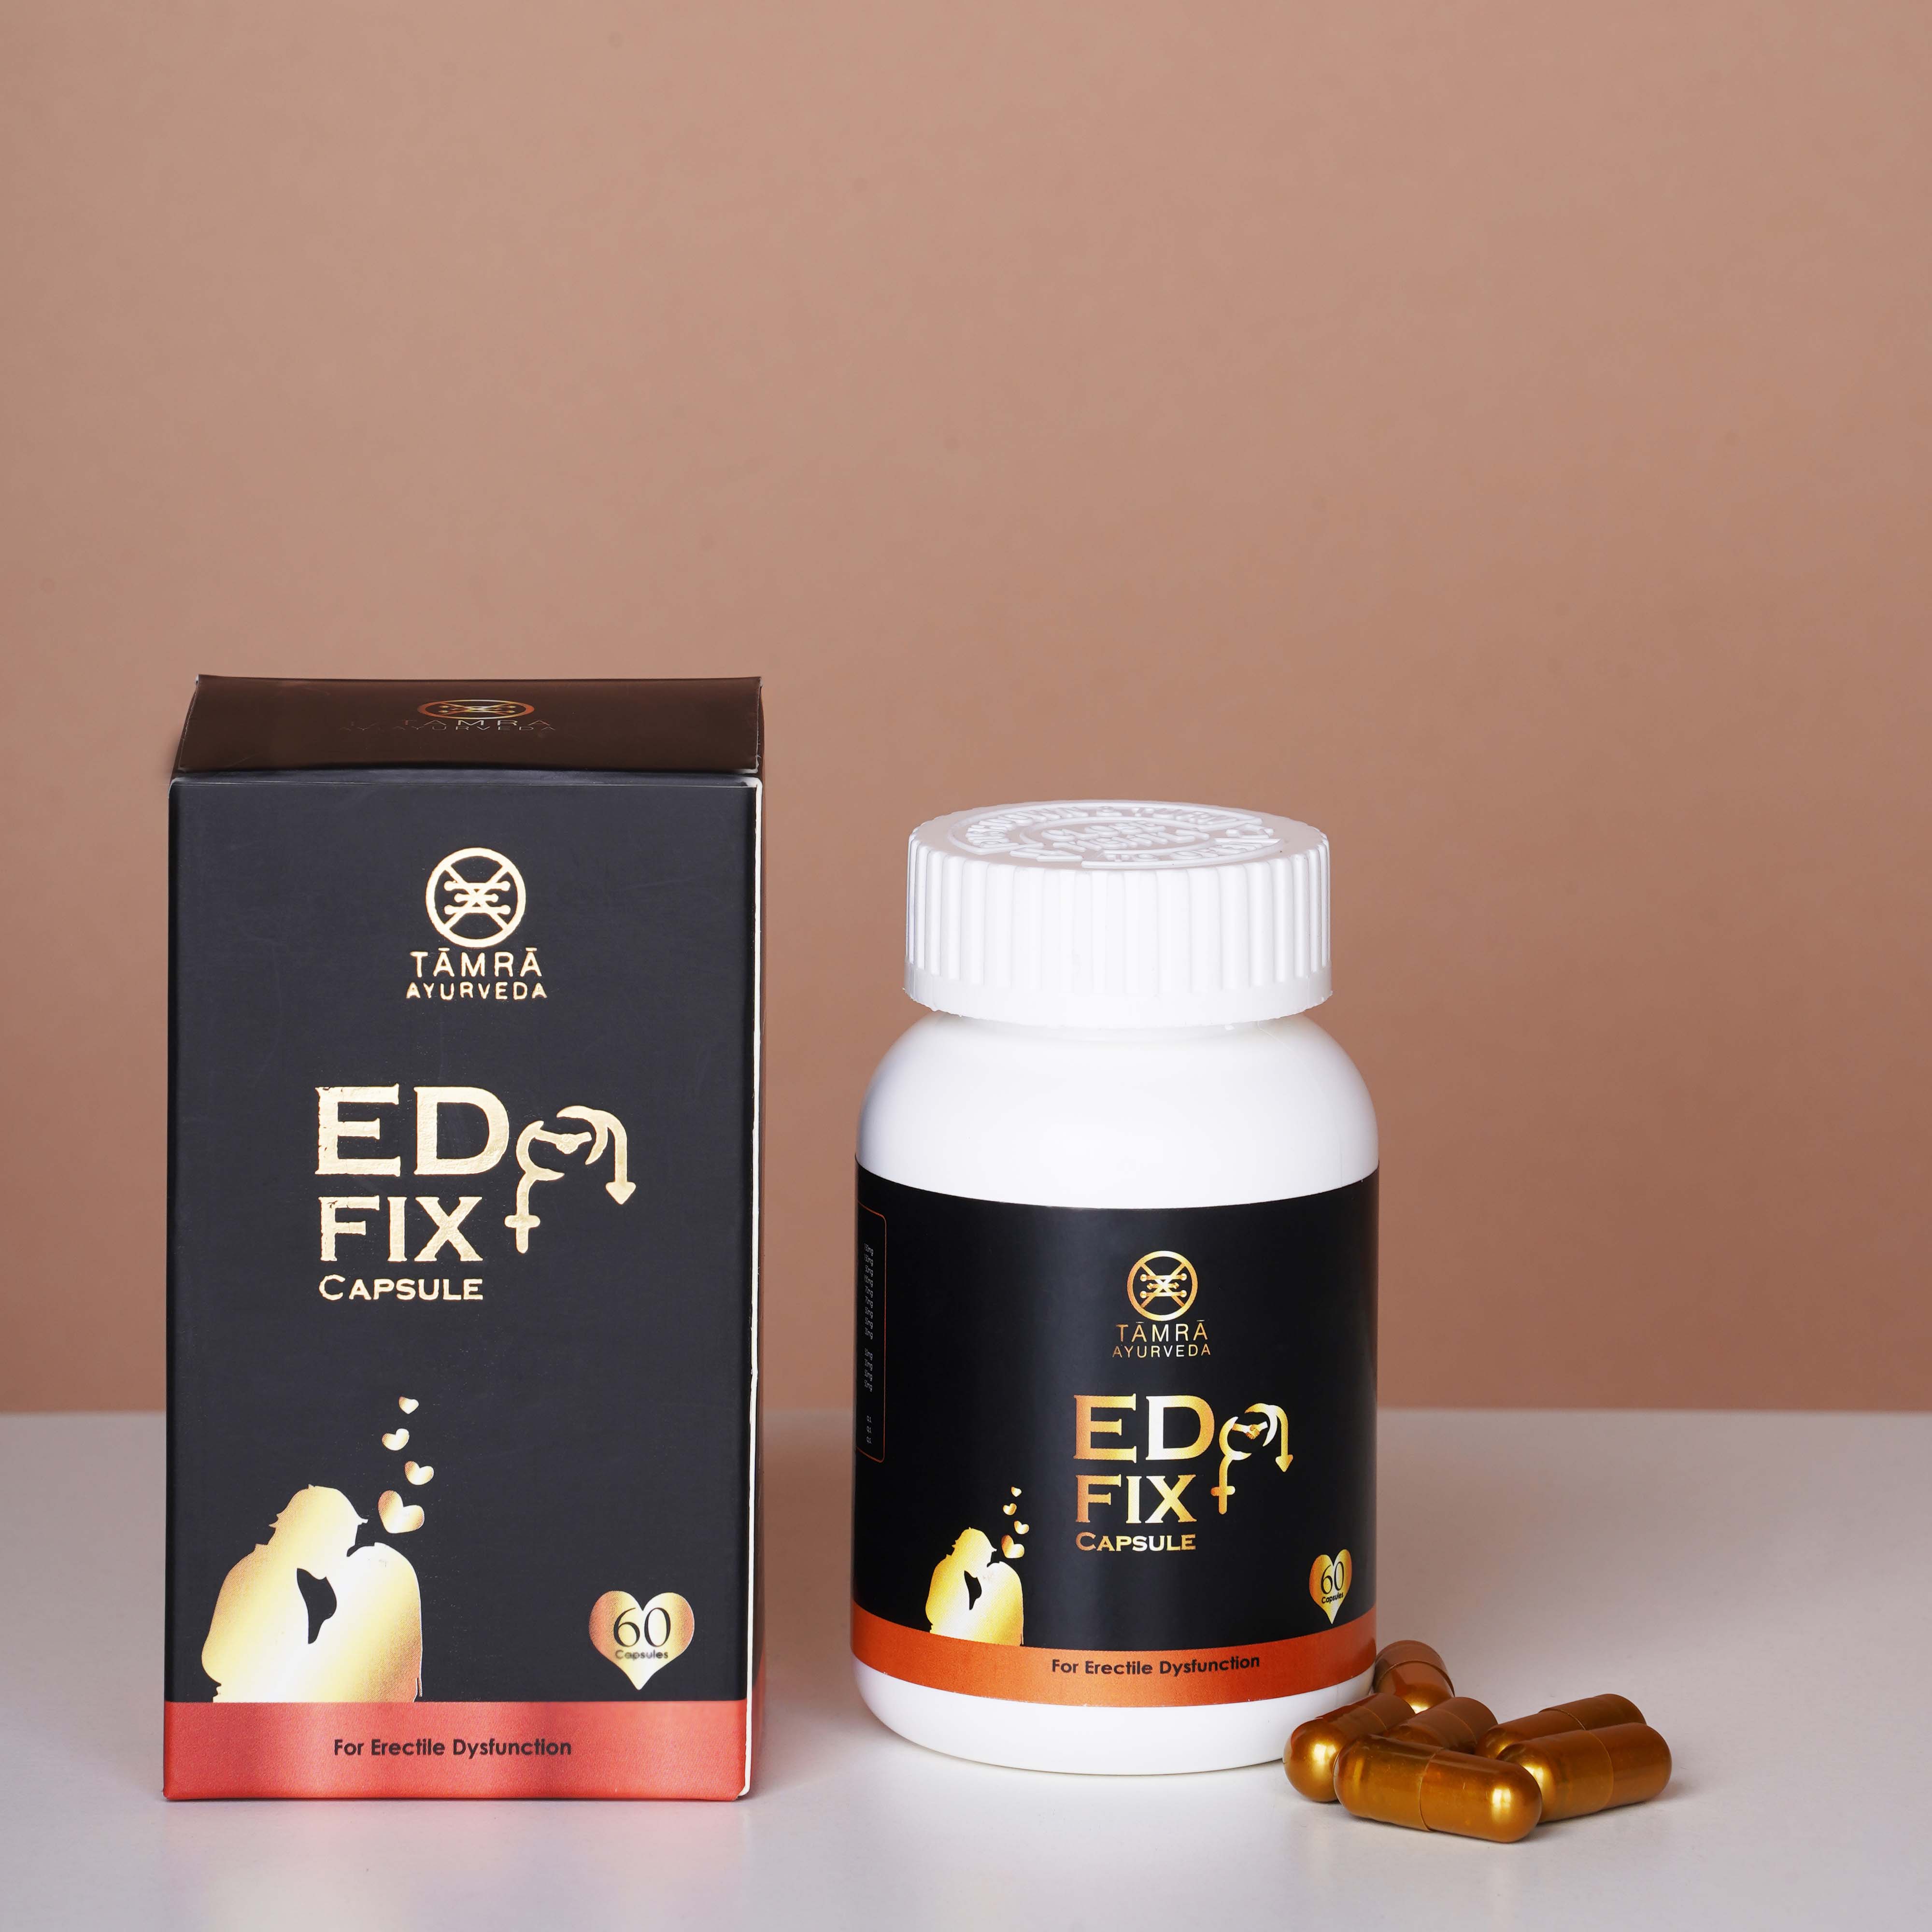 ED FIX Capsule–To increase libido & fix erectile dysfunction in males